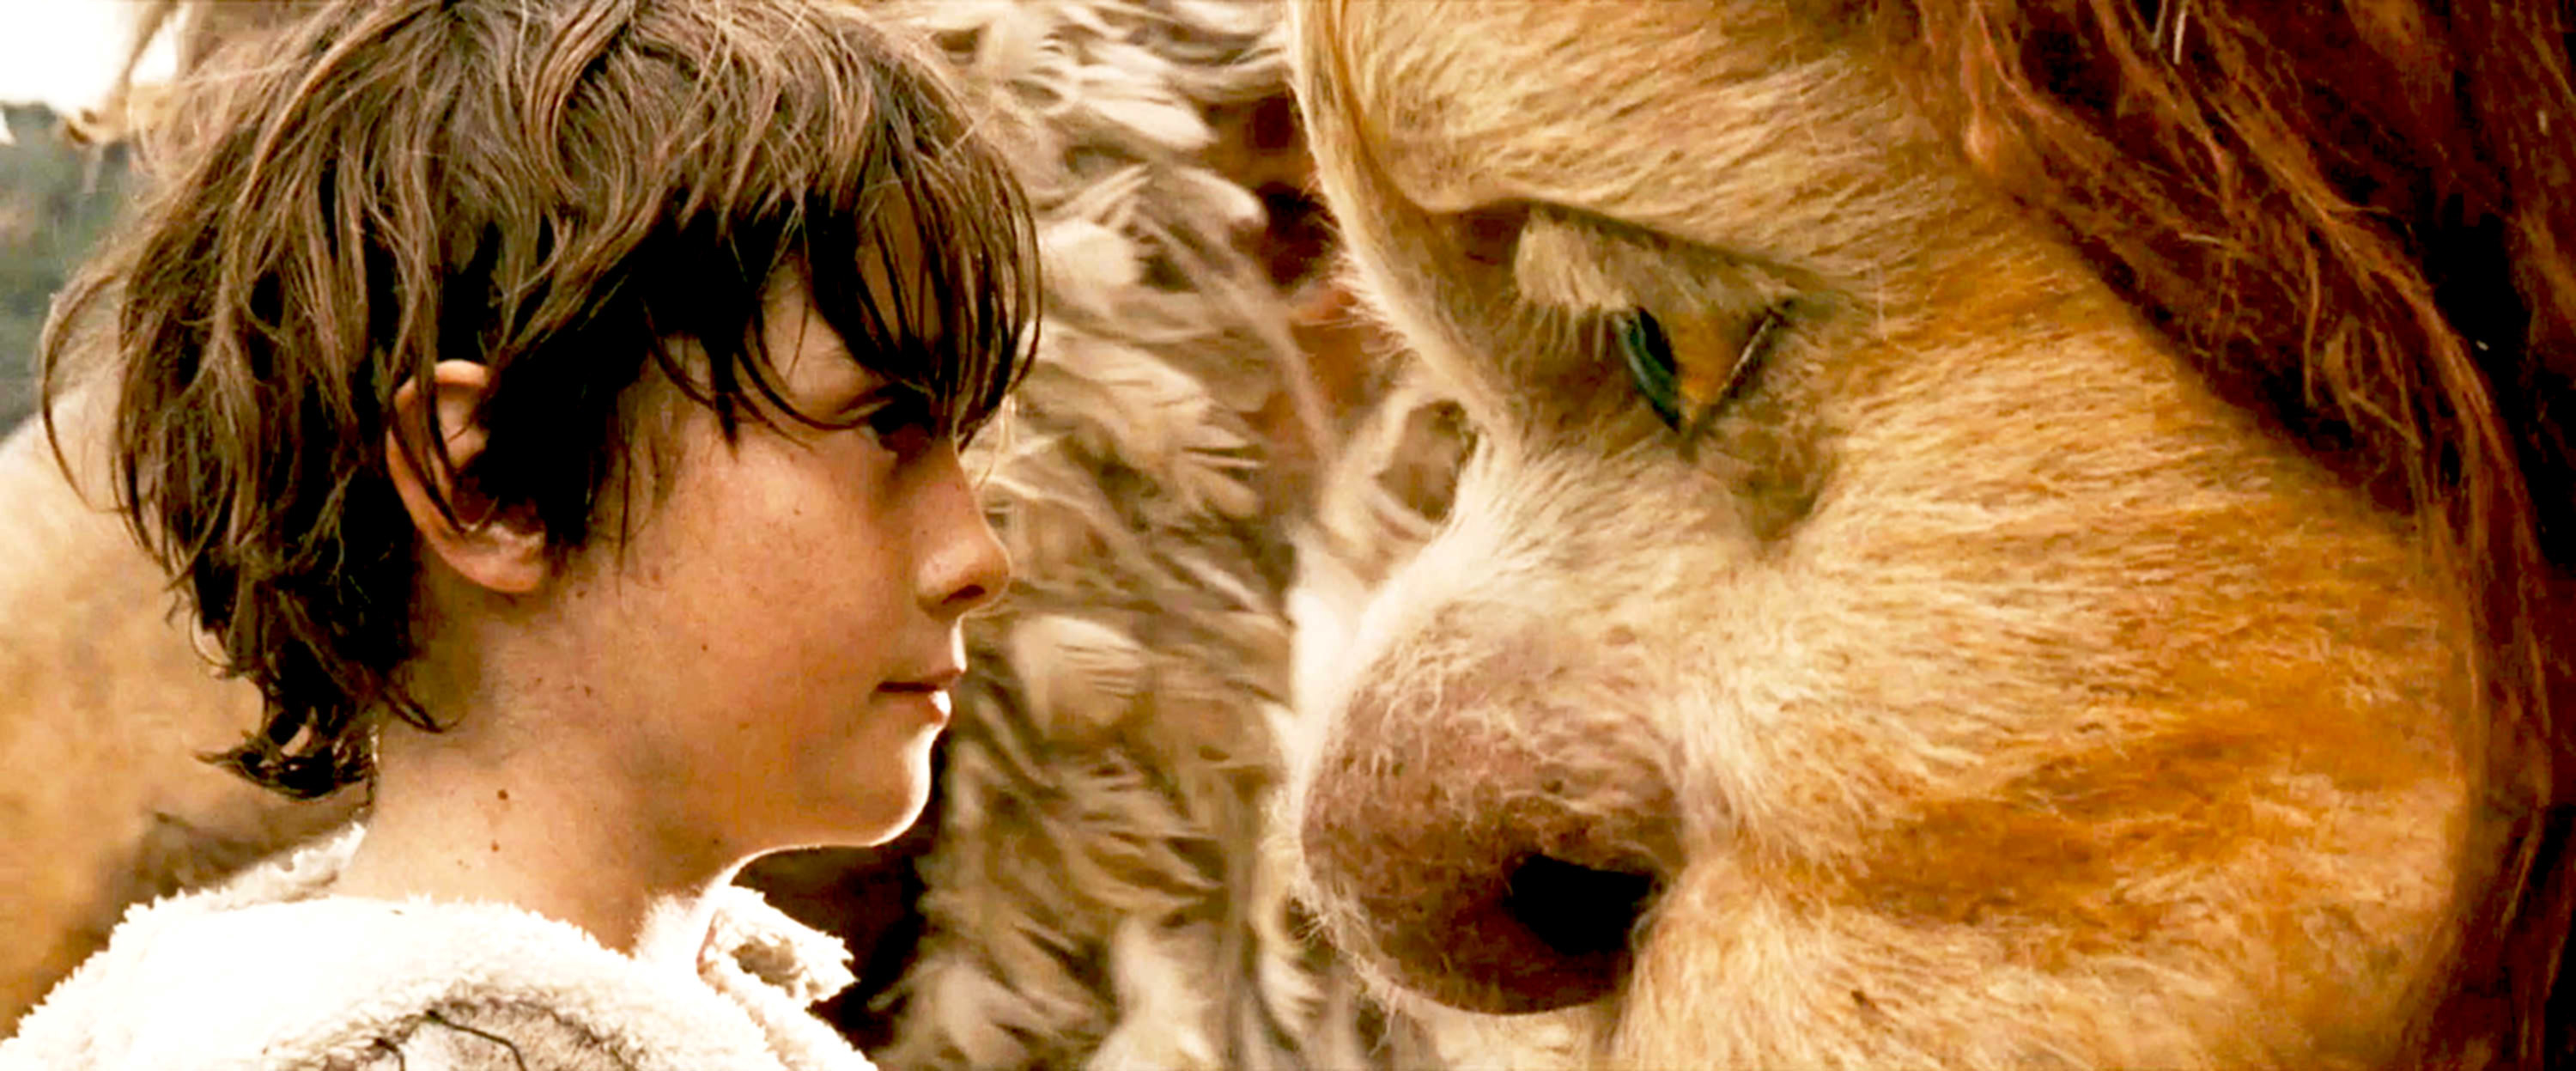 A child looks into the eyes of a fluffy creature